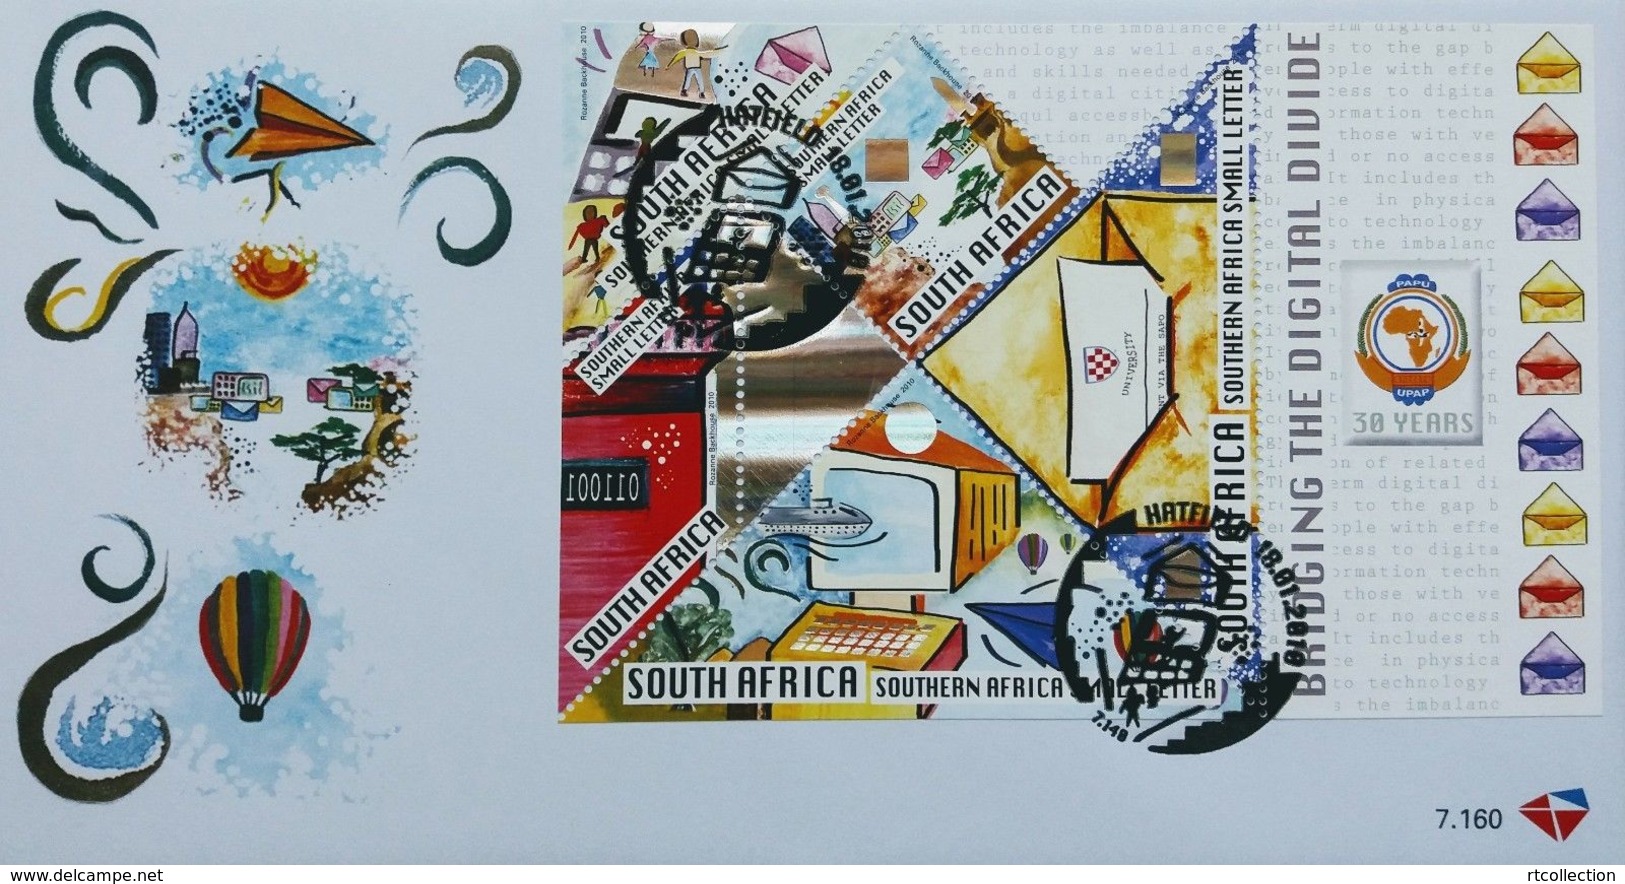 South Africa 2010 First Day Cover FDC Bridging The Digital Divide Letter Computers Sciences Post 18/1/2010 Stamps SG1743 - Post